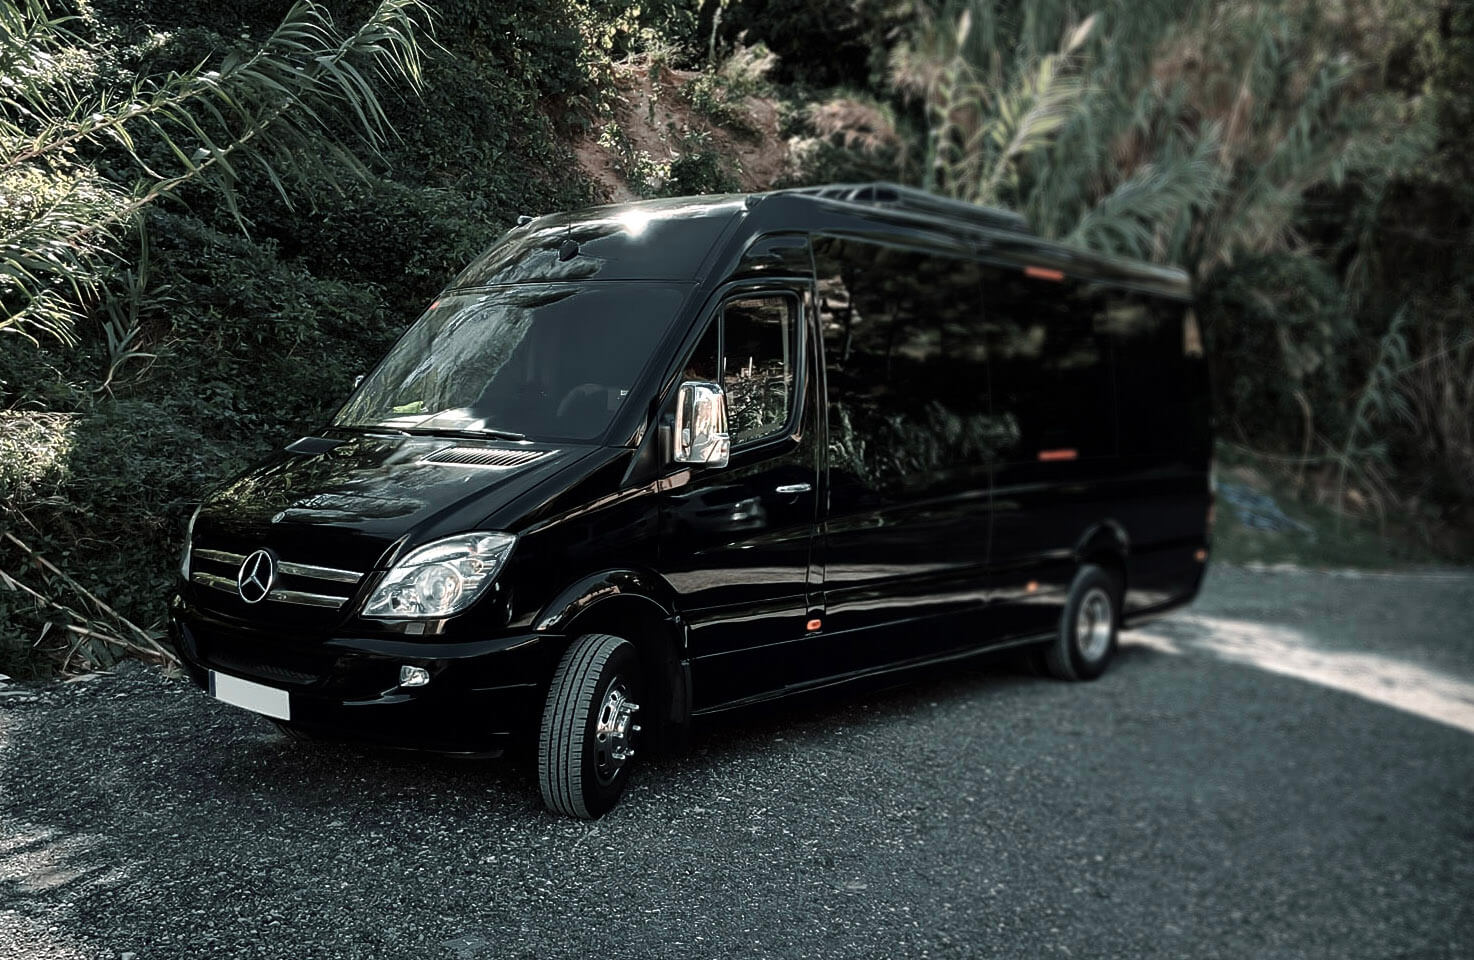 Hire a 16 seater Minibus  (Mercedes Sprinter 2011) from Bcn City Bus Tour s.l. in Viladecavalls 